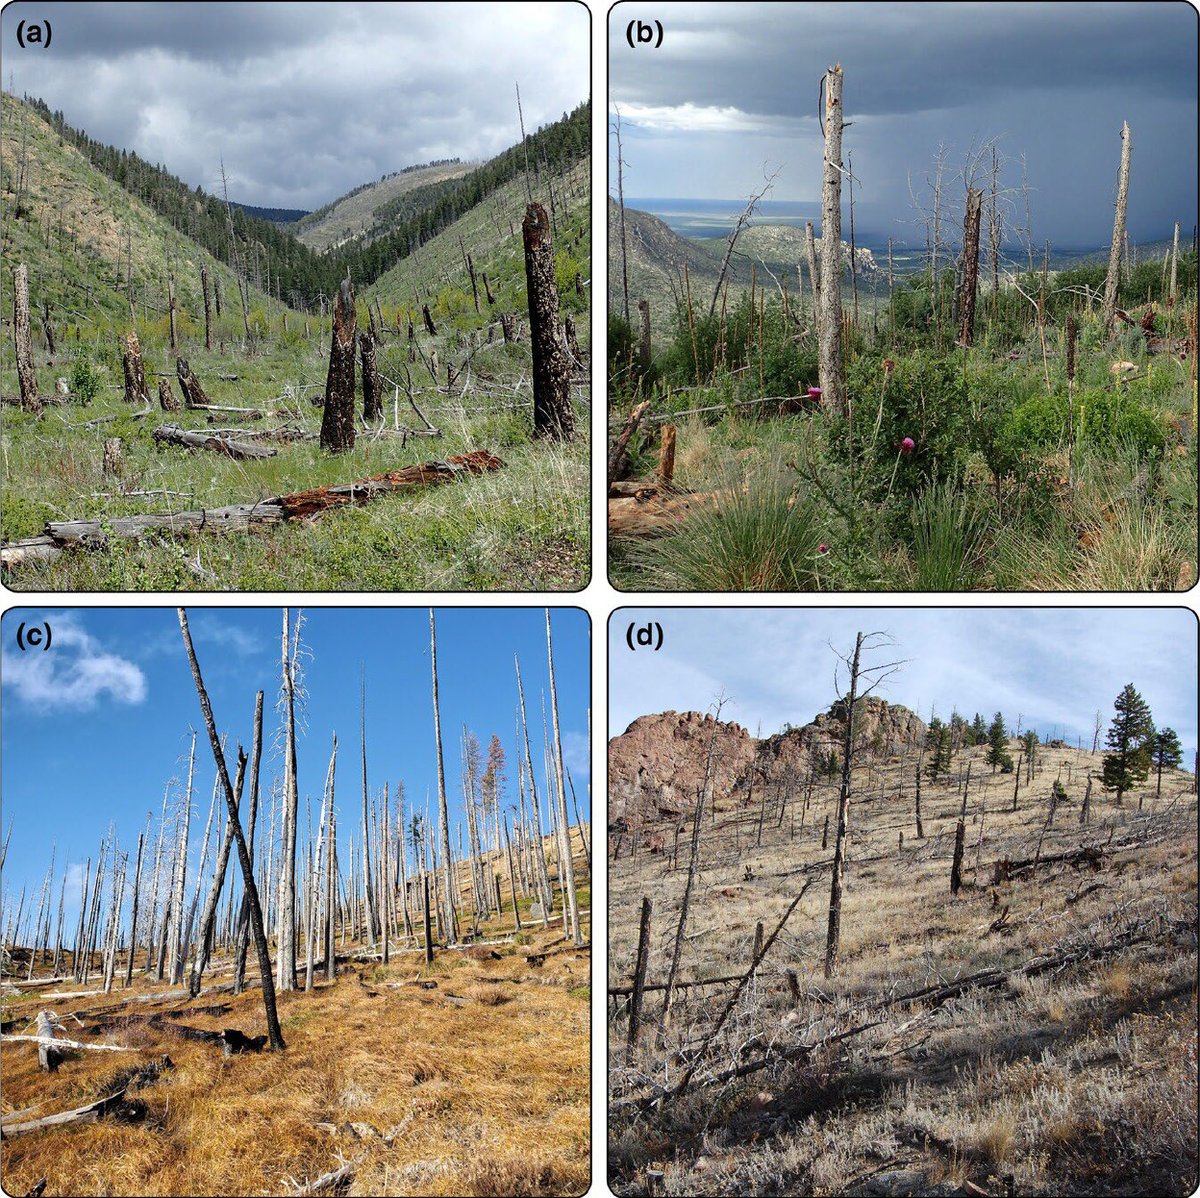 New in @ESAFrontiers: A call for collaborative management with Indigenous communities, decision-relevant science, & adaptive monitoring to address emerging climate risks in post-fire #VegetationTransitions across the western US doi.org/10.1002/fee.27…